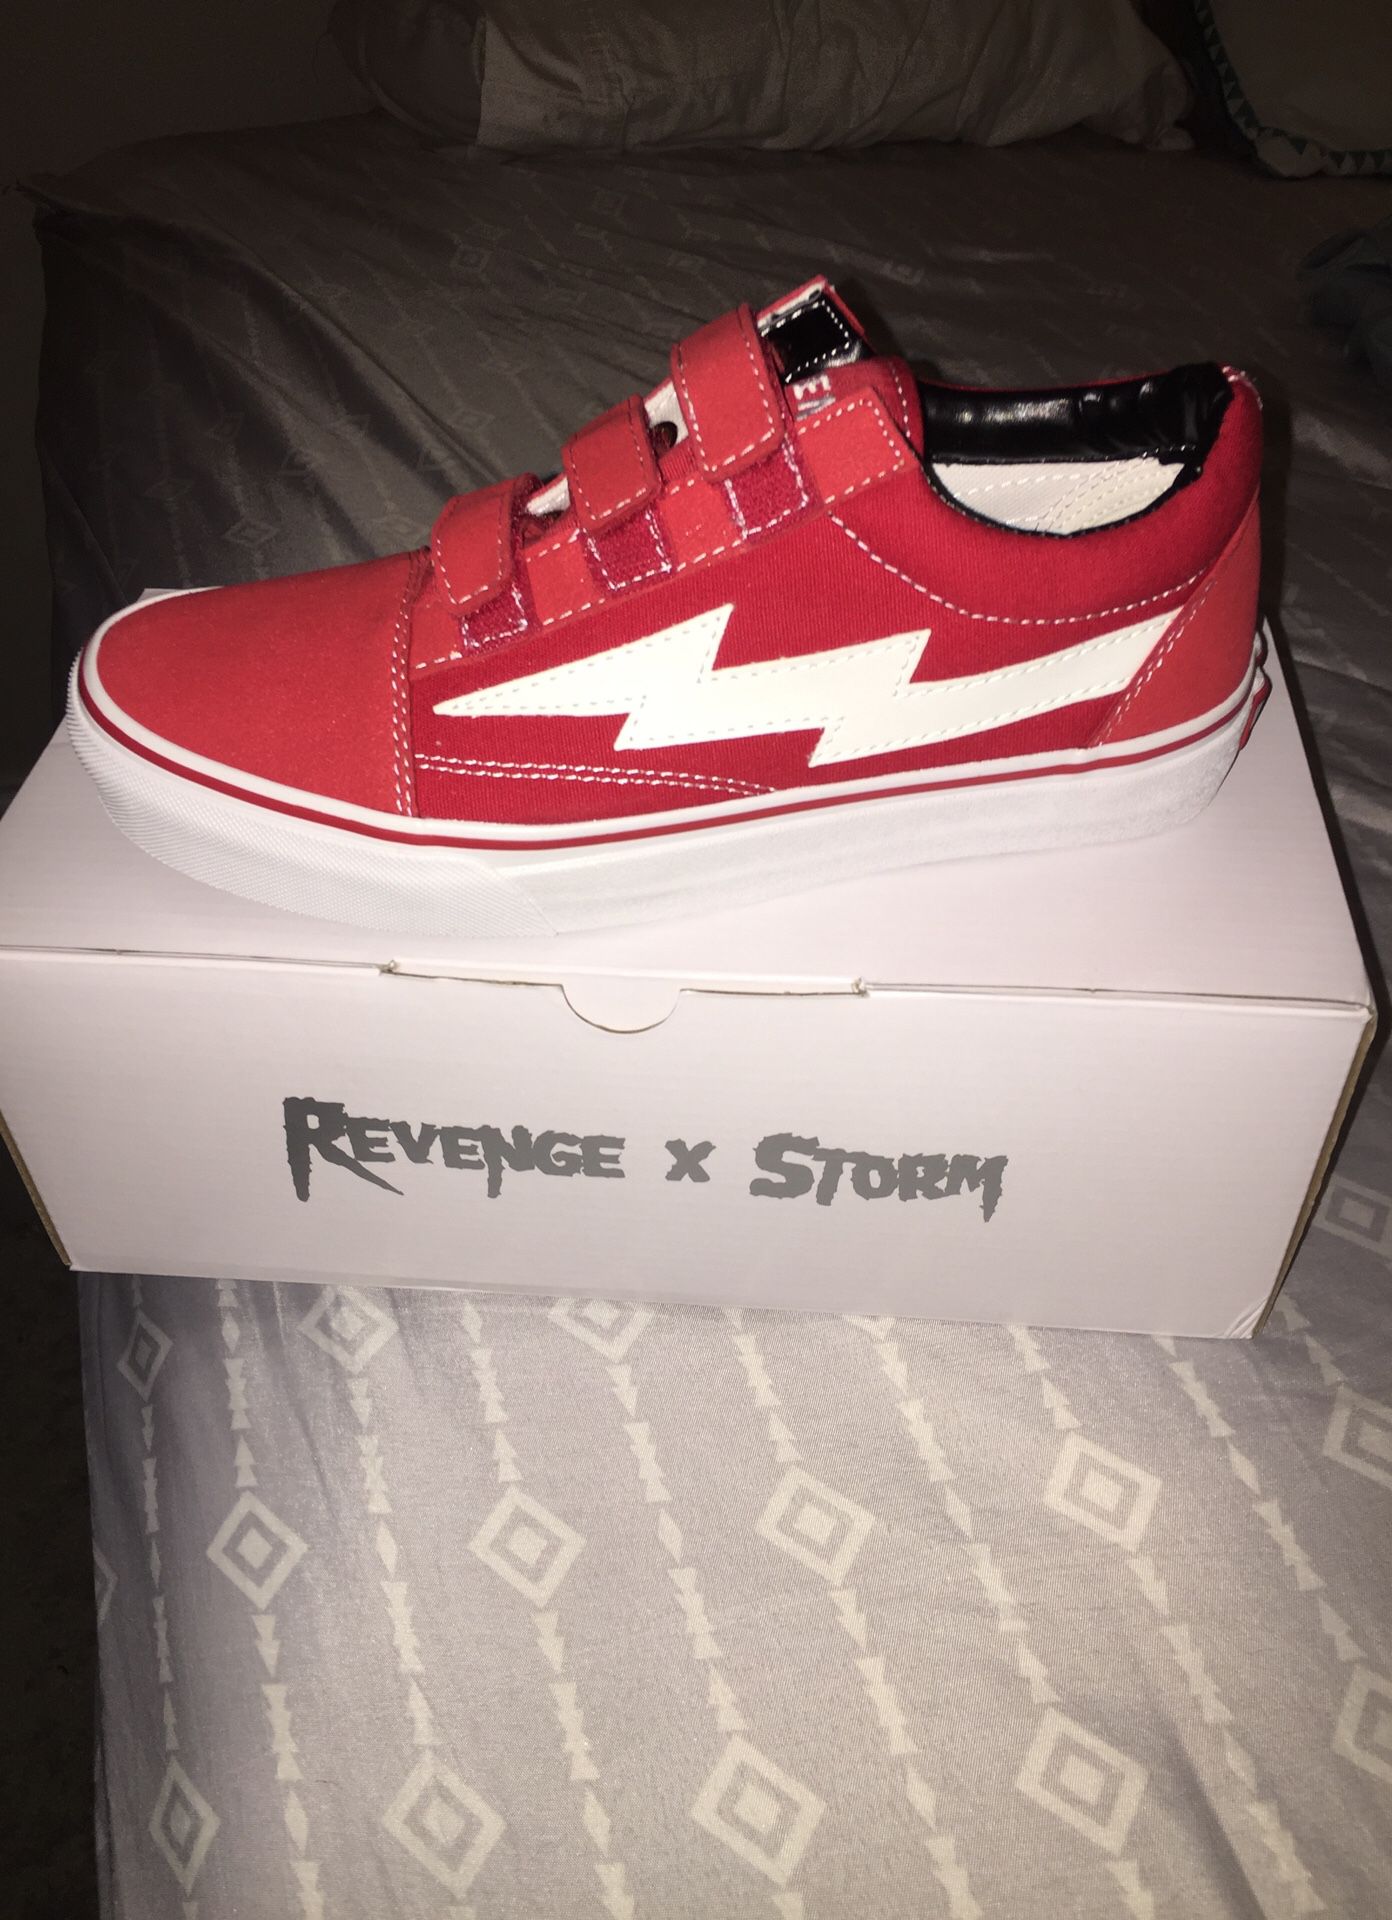 Revenge x Storm Red straps VANS for Sale in Dallas, TX - OfferUp